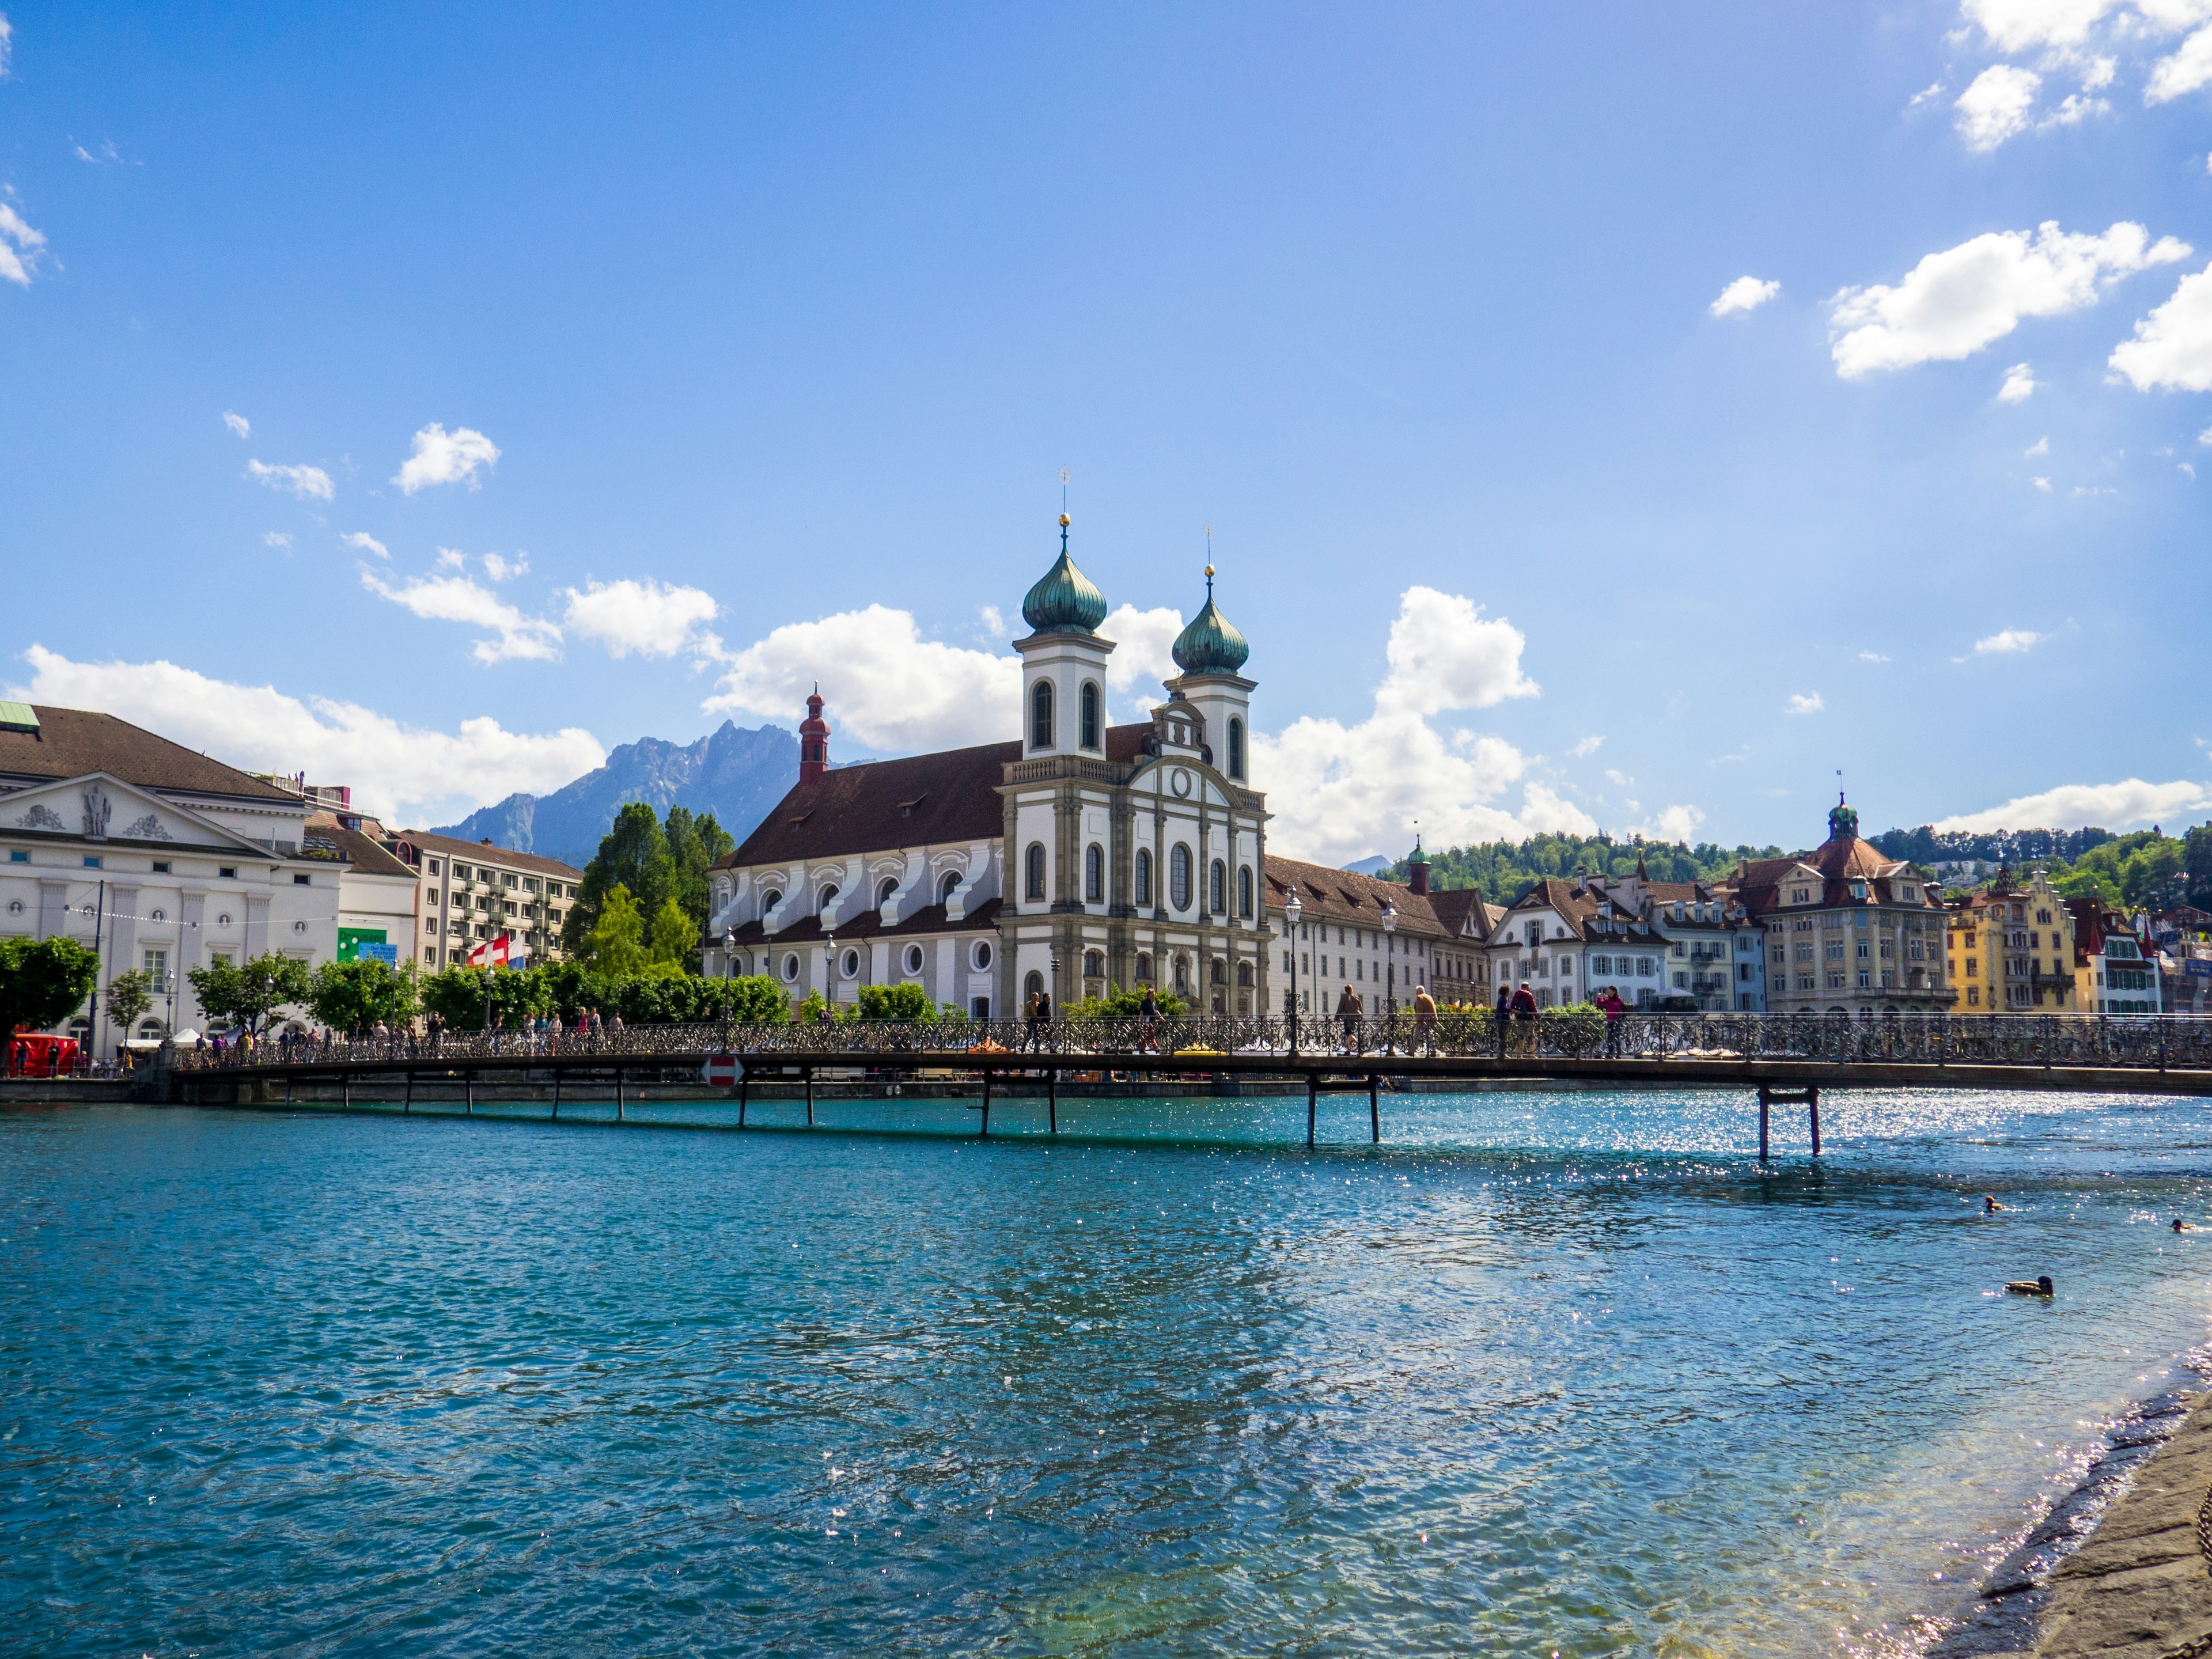 List of Things to See & Do in Lucerne Switzerland